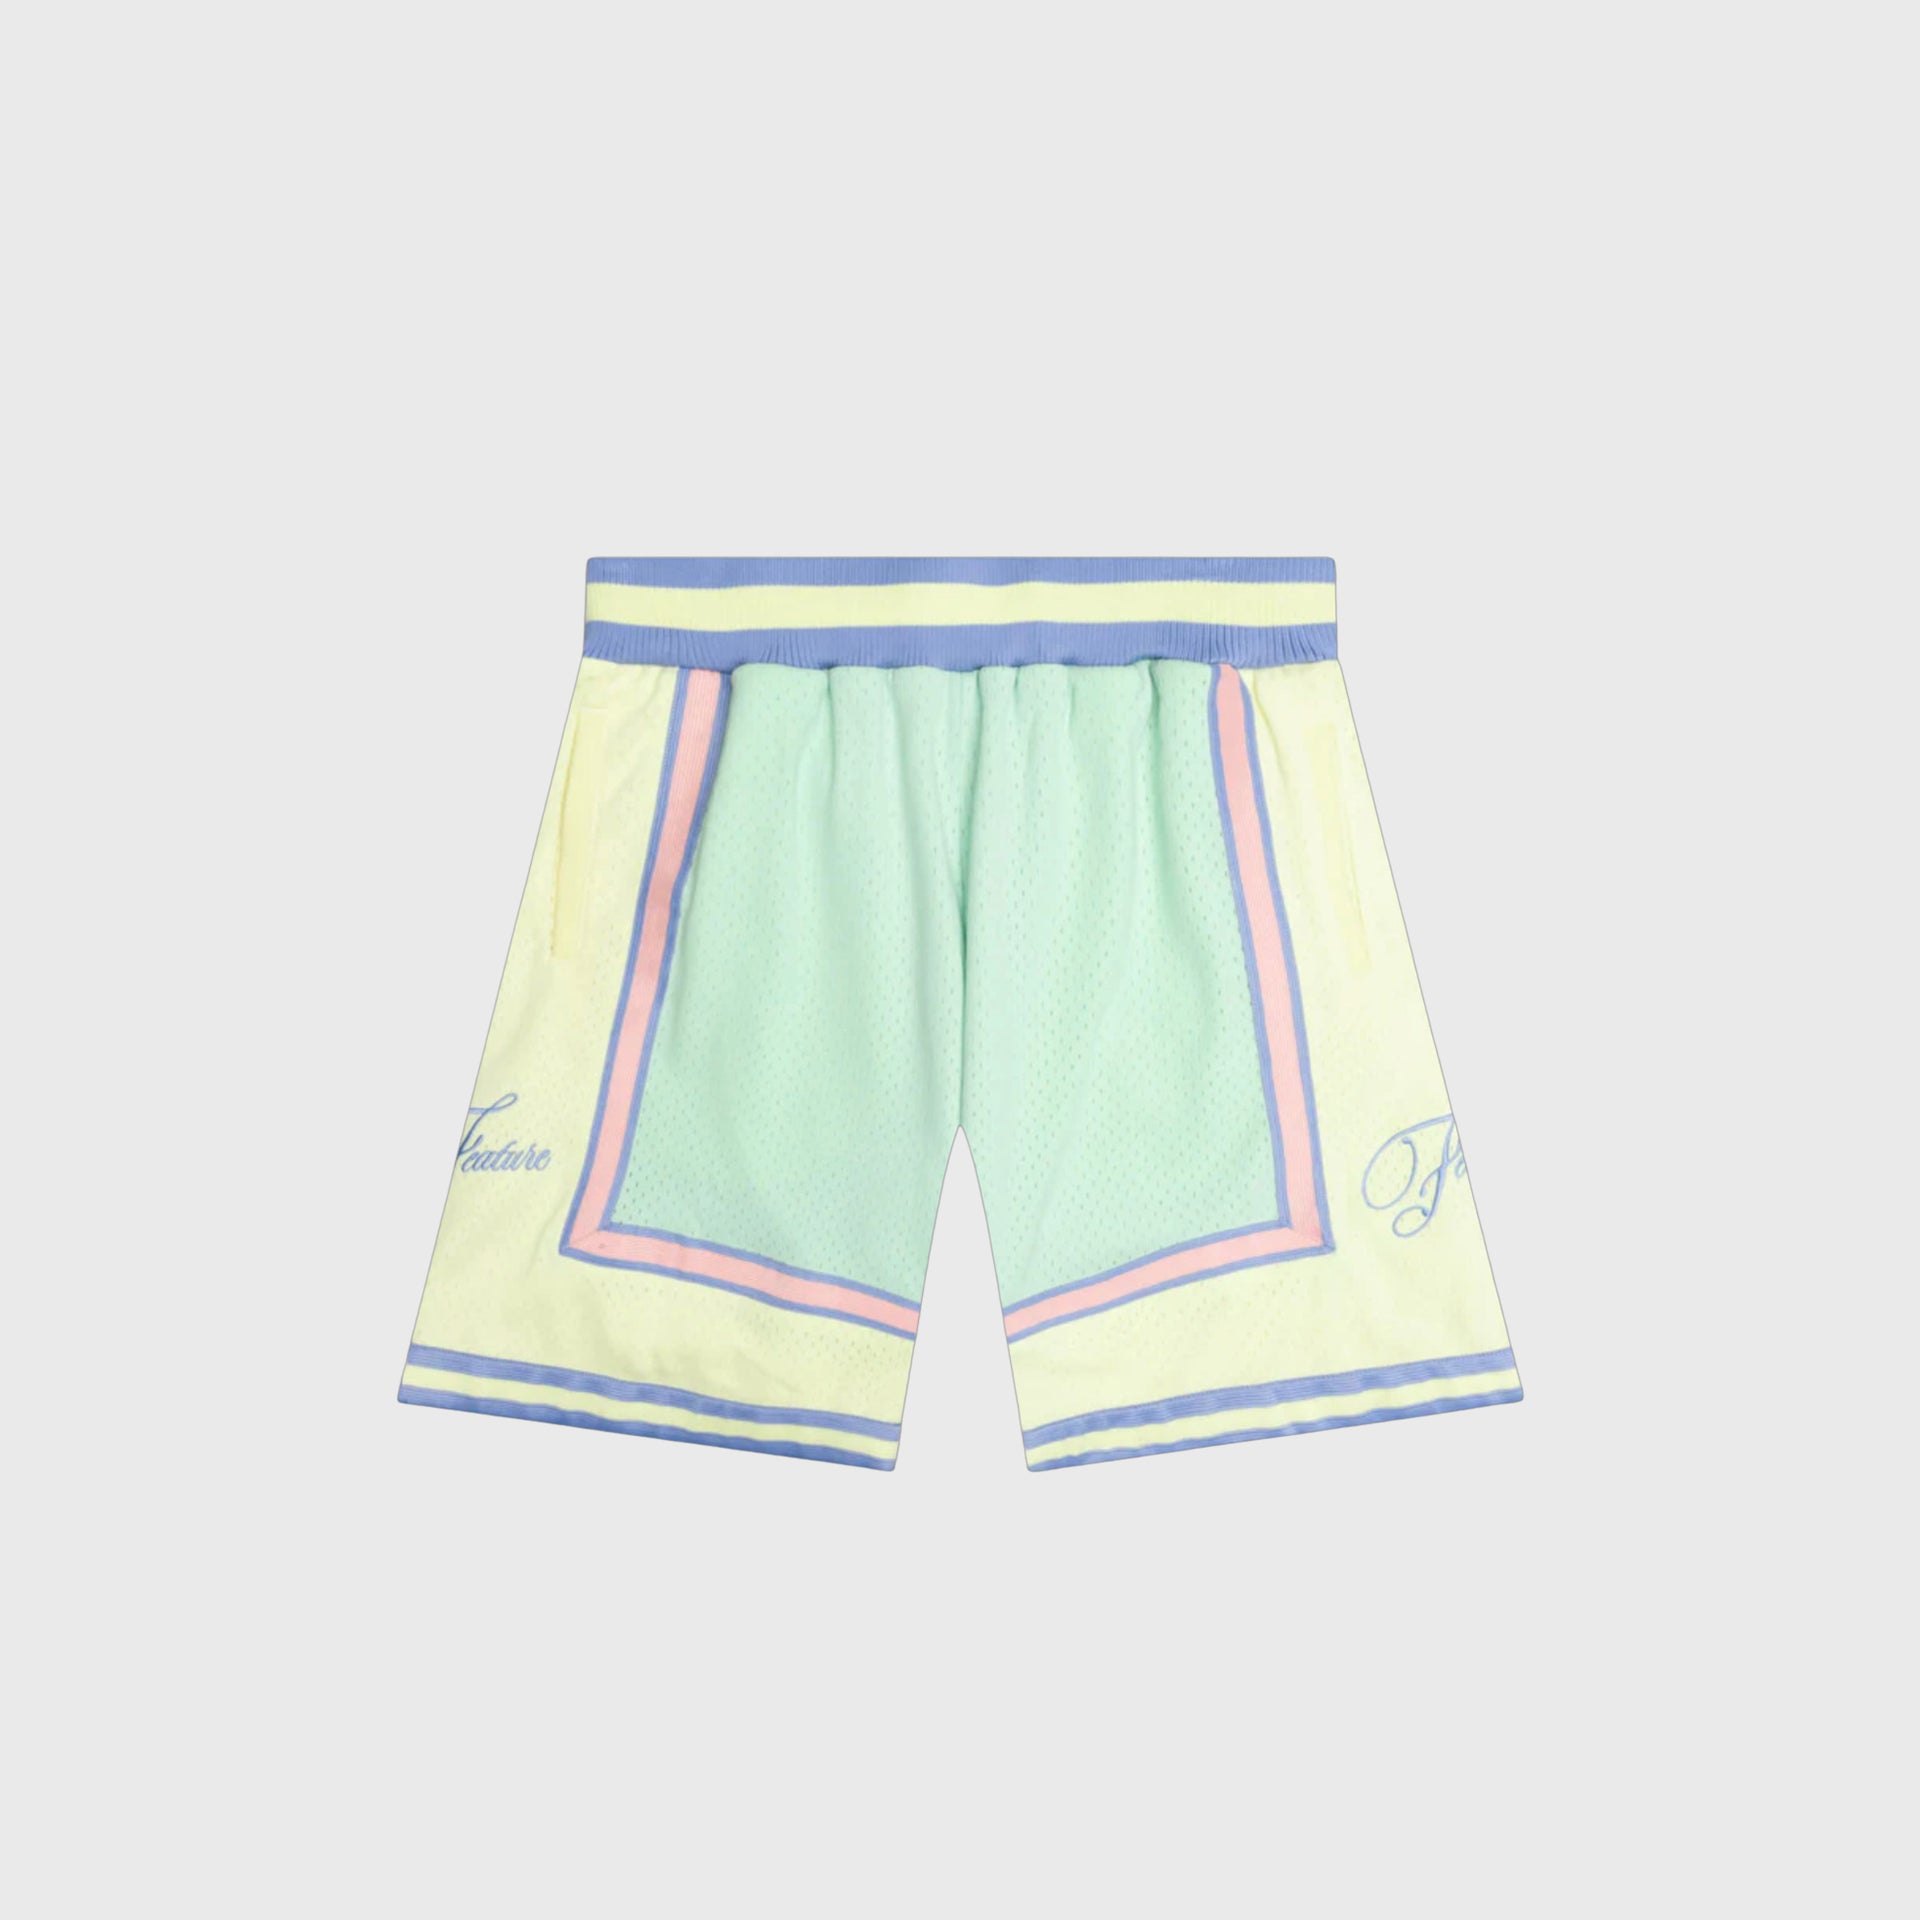 FEATURE X MITCHELL & NESS SHORTS